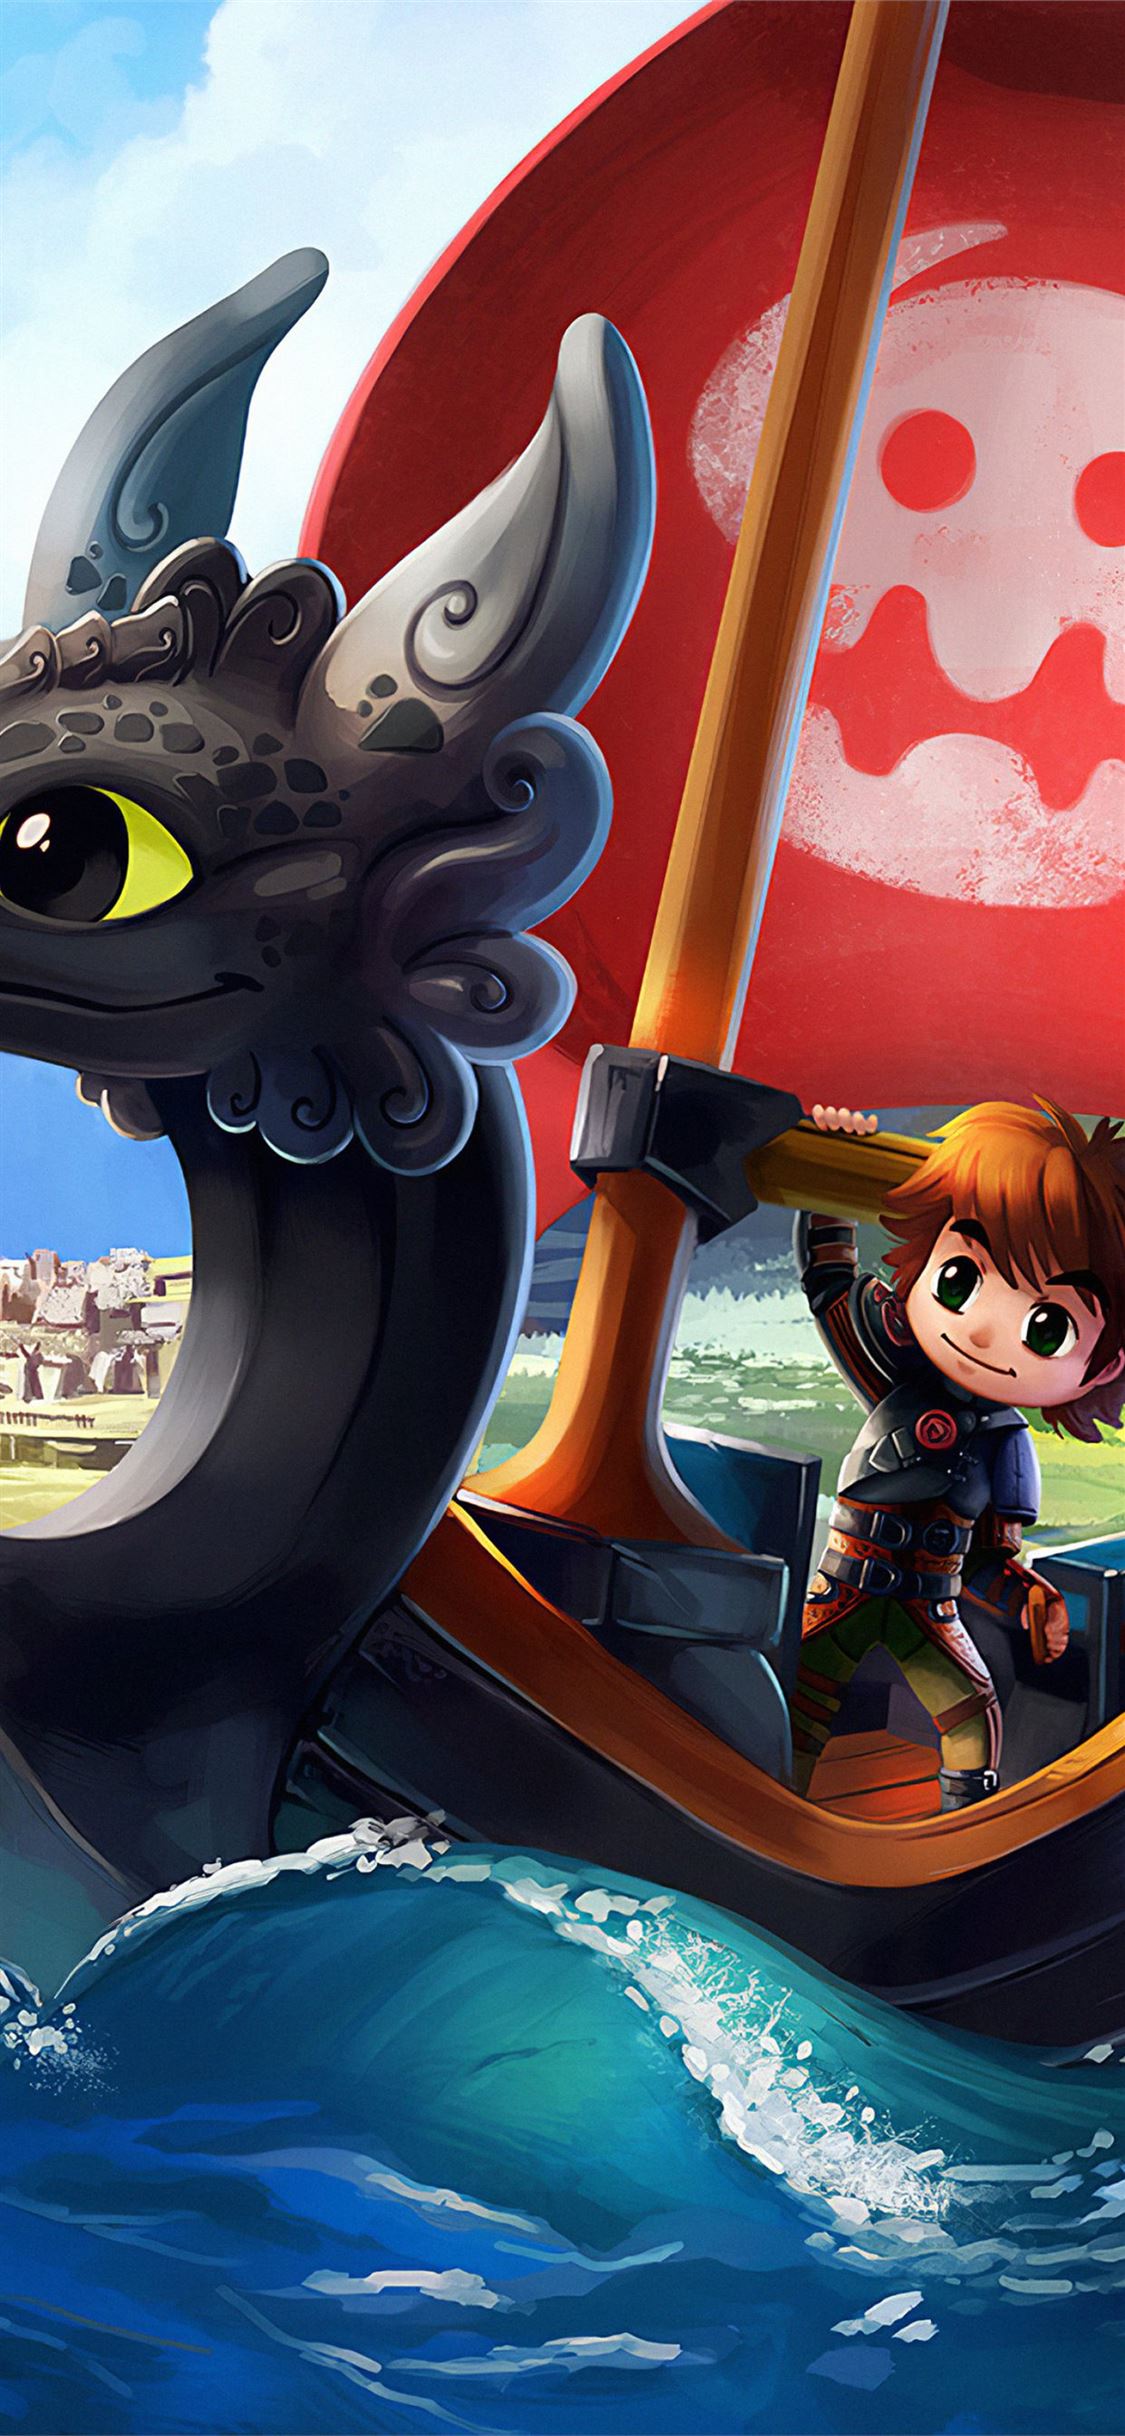 How To Train Your Dragon And Wind Waker Crossover Iphone X Wallpapers Free Download